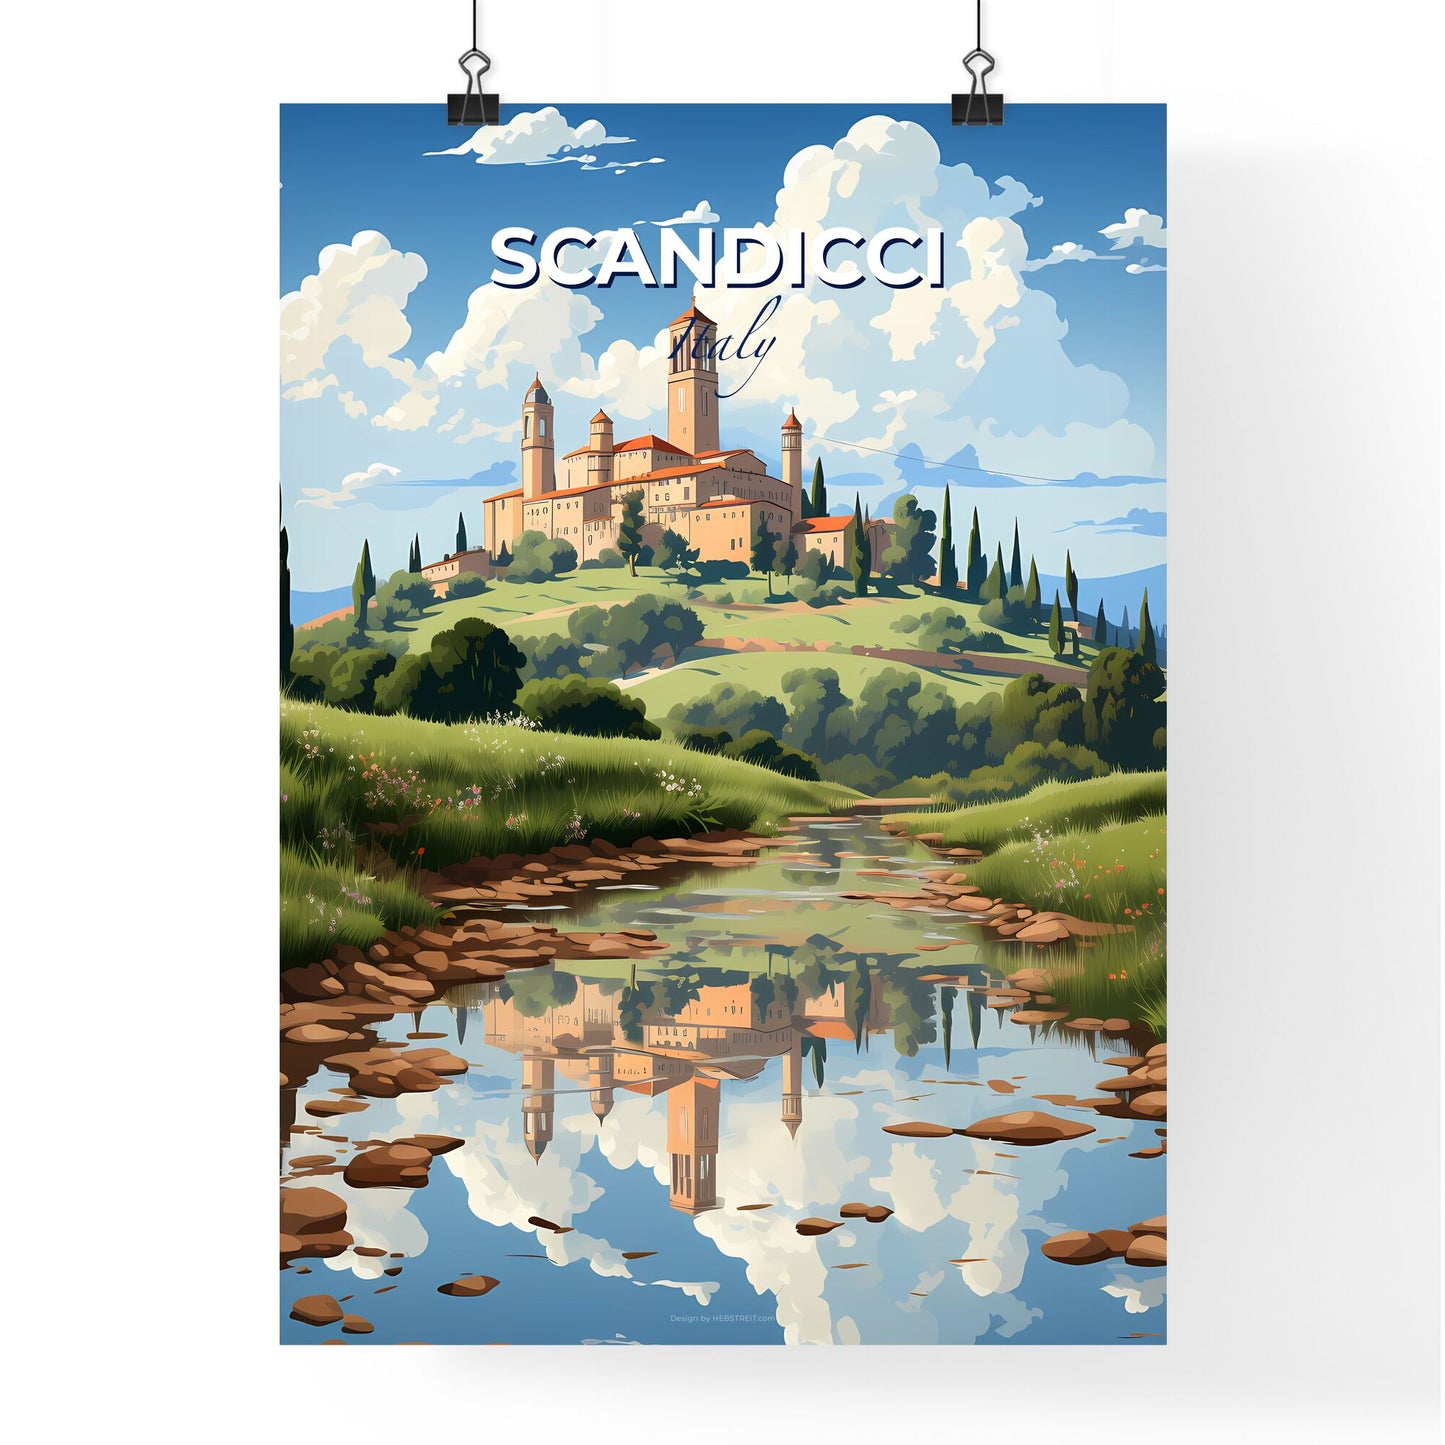 Scandicci, Italy, A Poster of a castle on a hill with a river Default Title